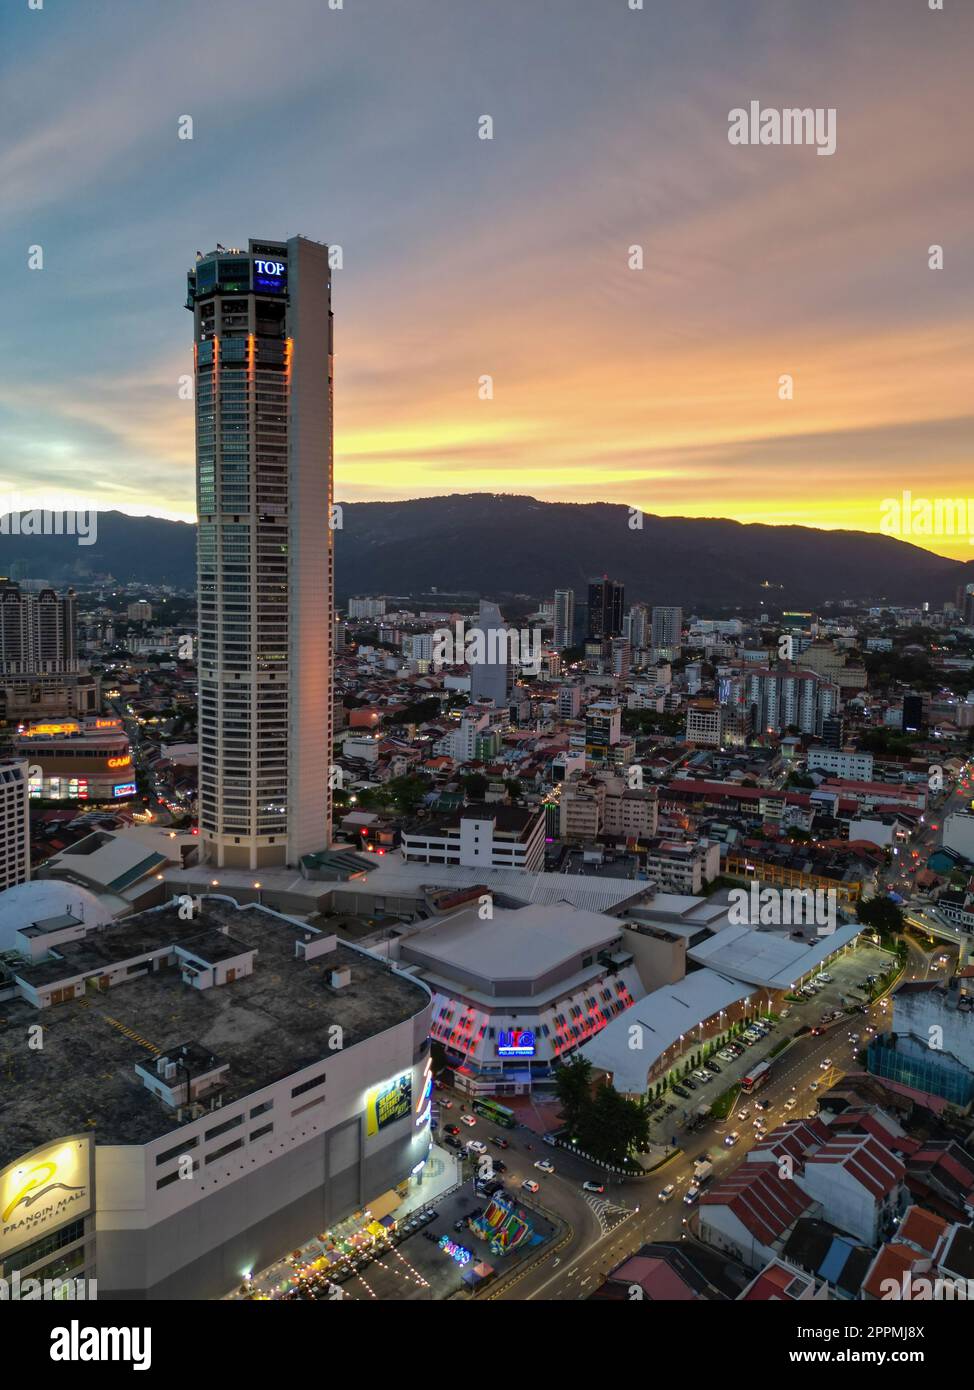 Vertical view of Komtar building and Prangin Mall in dramatic sunset hour Stock Photo